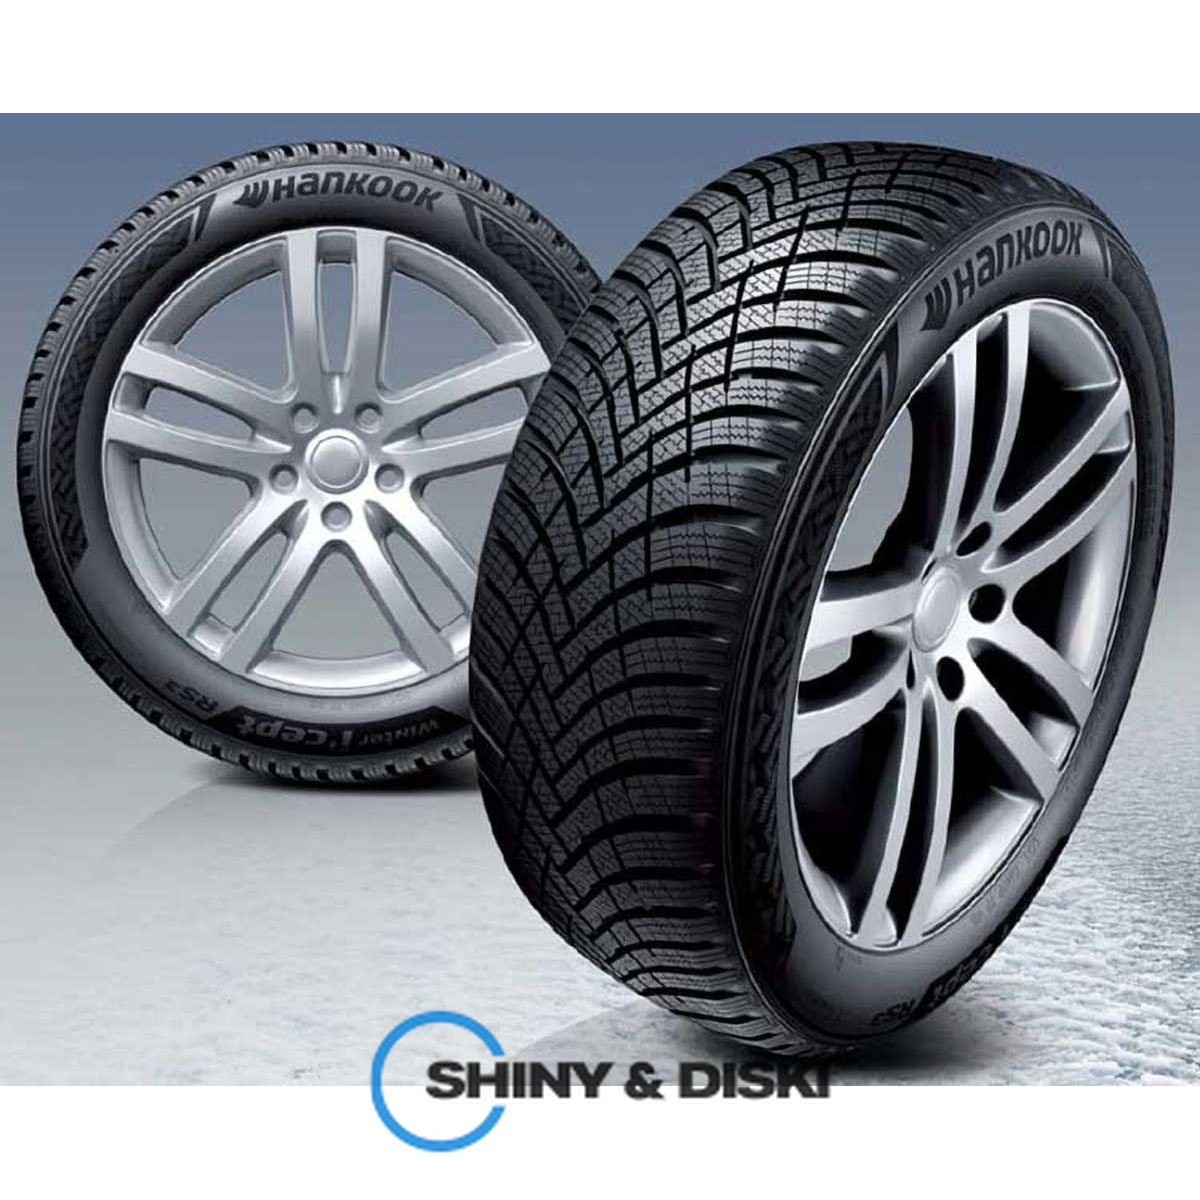 покрышки hankook winter i*cept rs3 w462 195/45 r17 81h